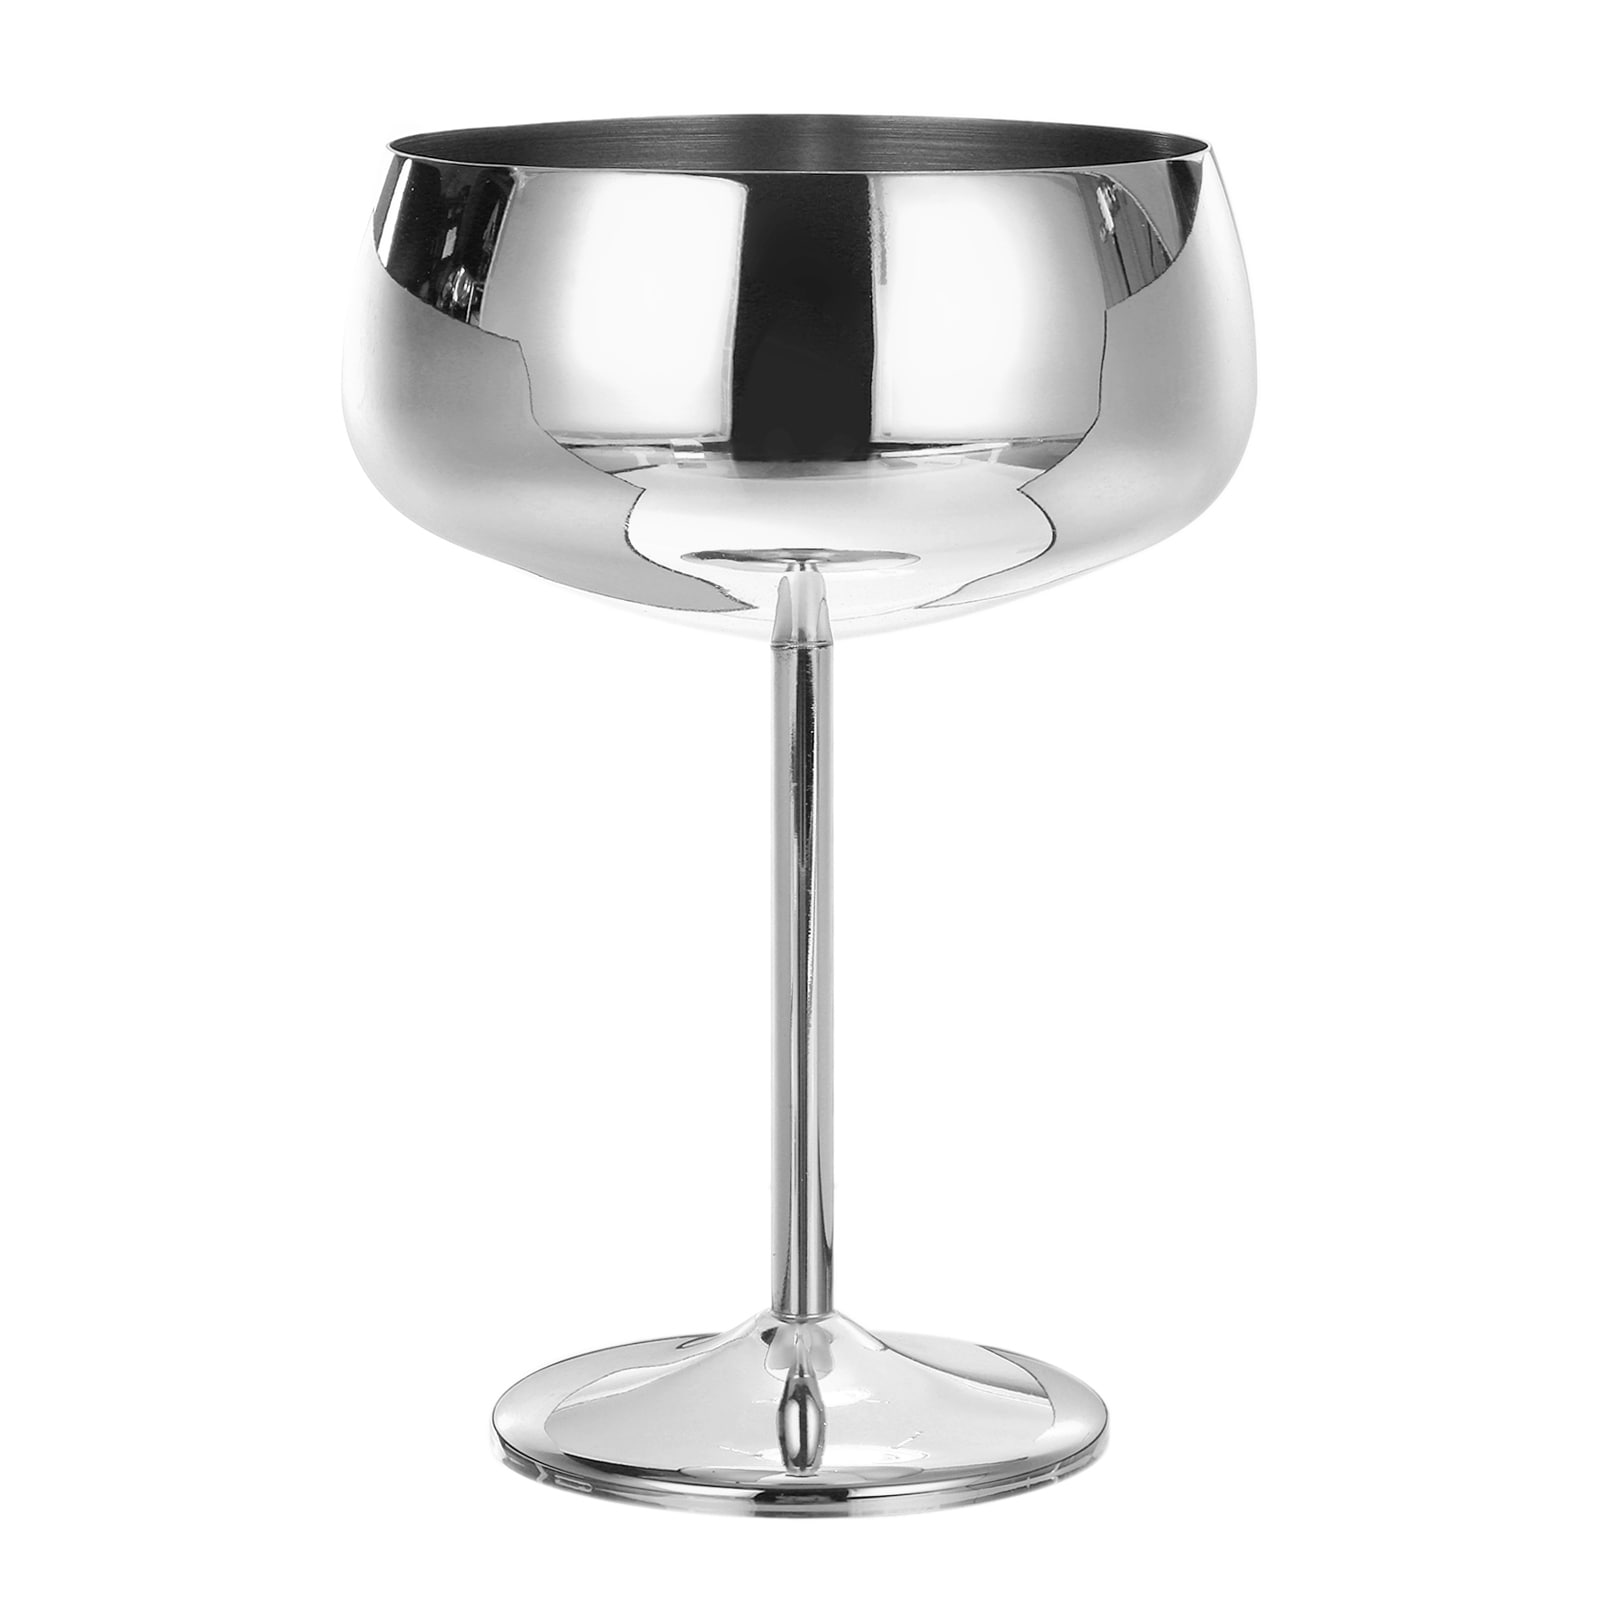 https://ak1.ostkcdn.com/images/products/is/images/direct/9fcae9a2f18126fdb5d385a69f618d130dd67535/Stainless-Steel-Martini-Cocktail-Glasses%2C-1Pcs-450ml-16-OZ-%2C-Silver.jpg